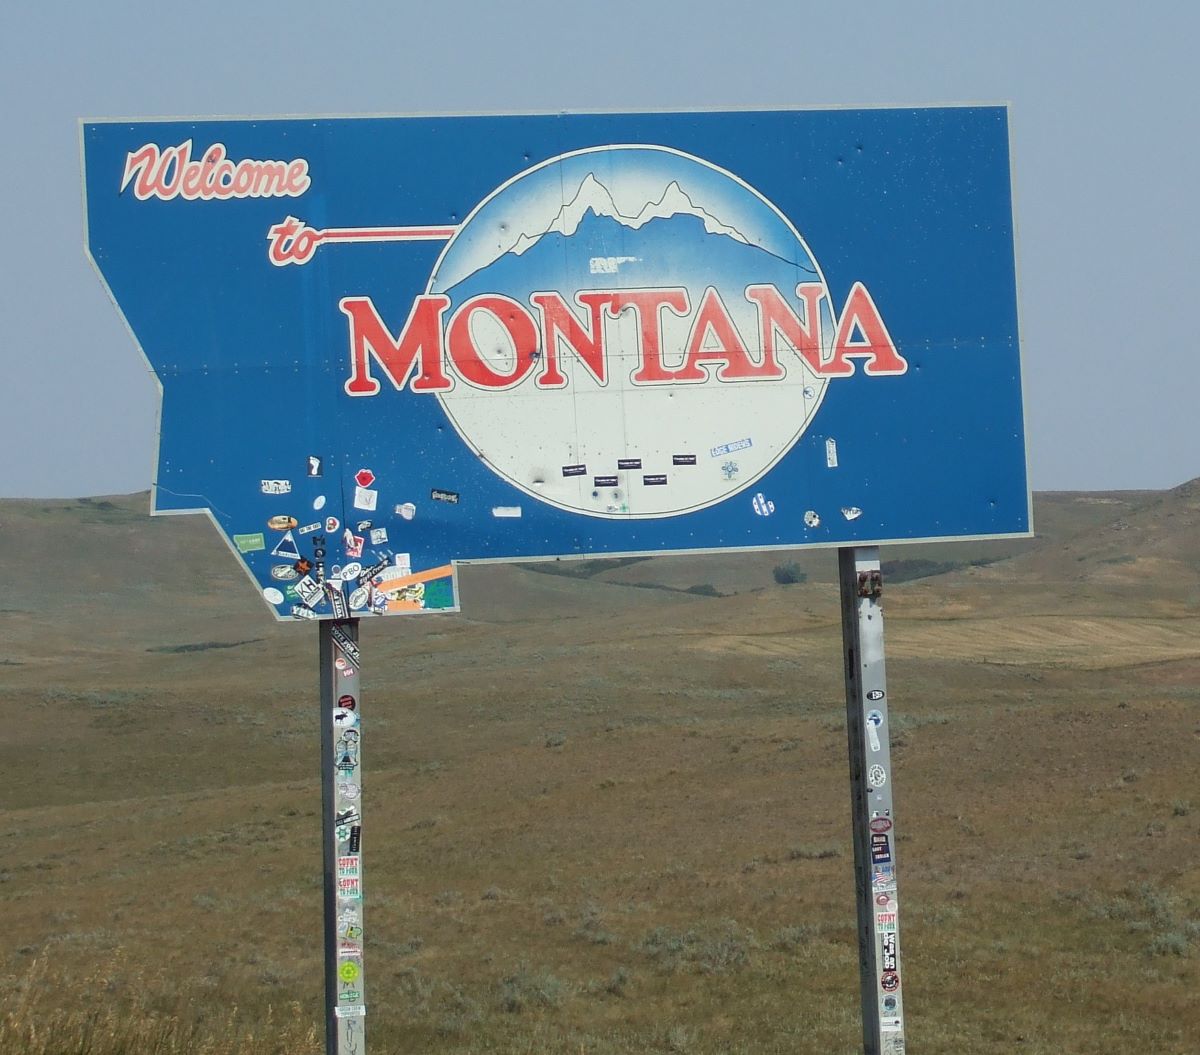 Montana’s new laws prohibit rigged elections, including sketchy balloting and shady funding.